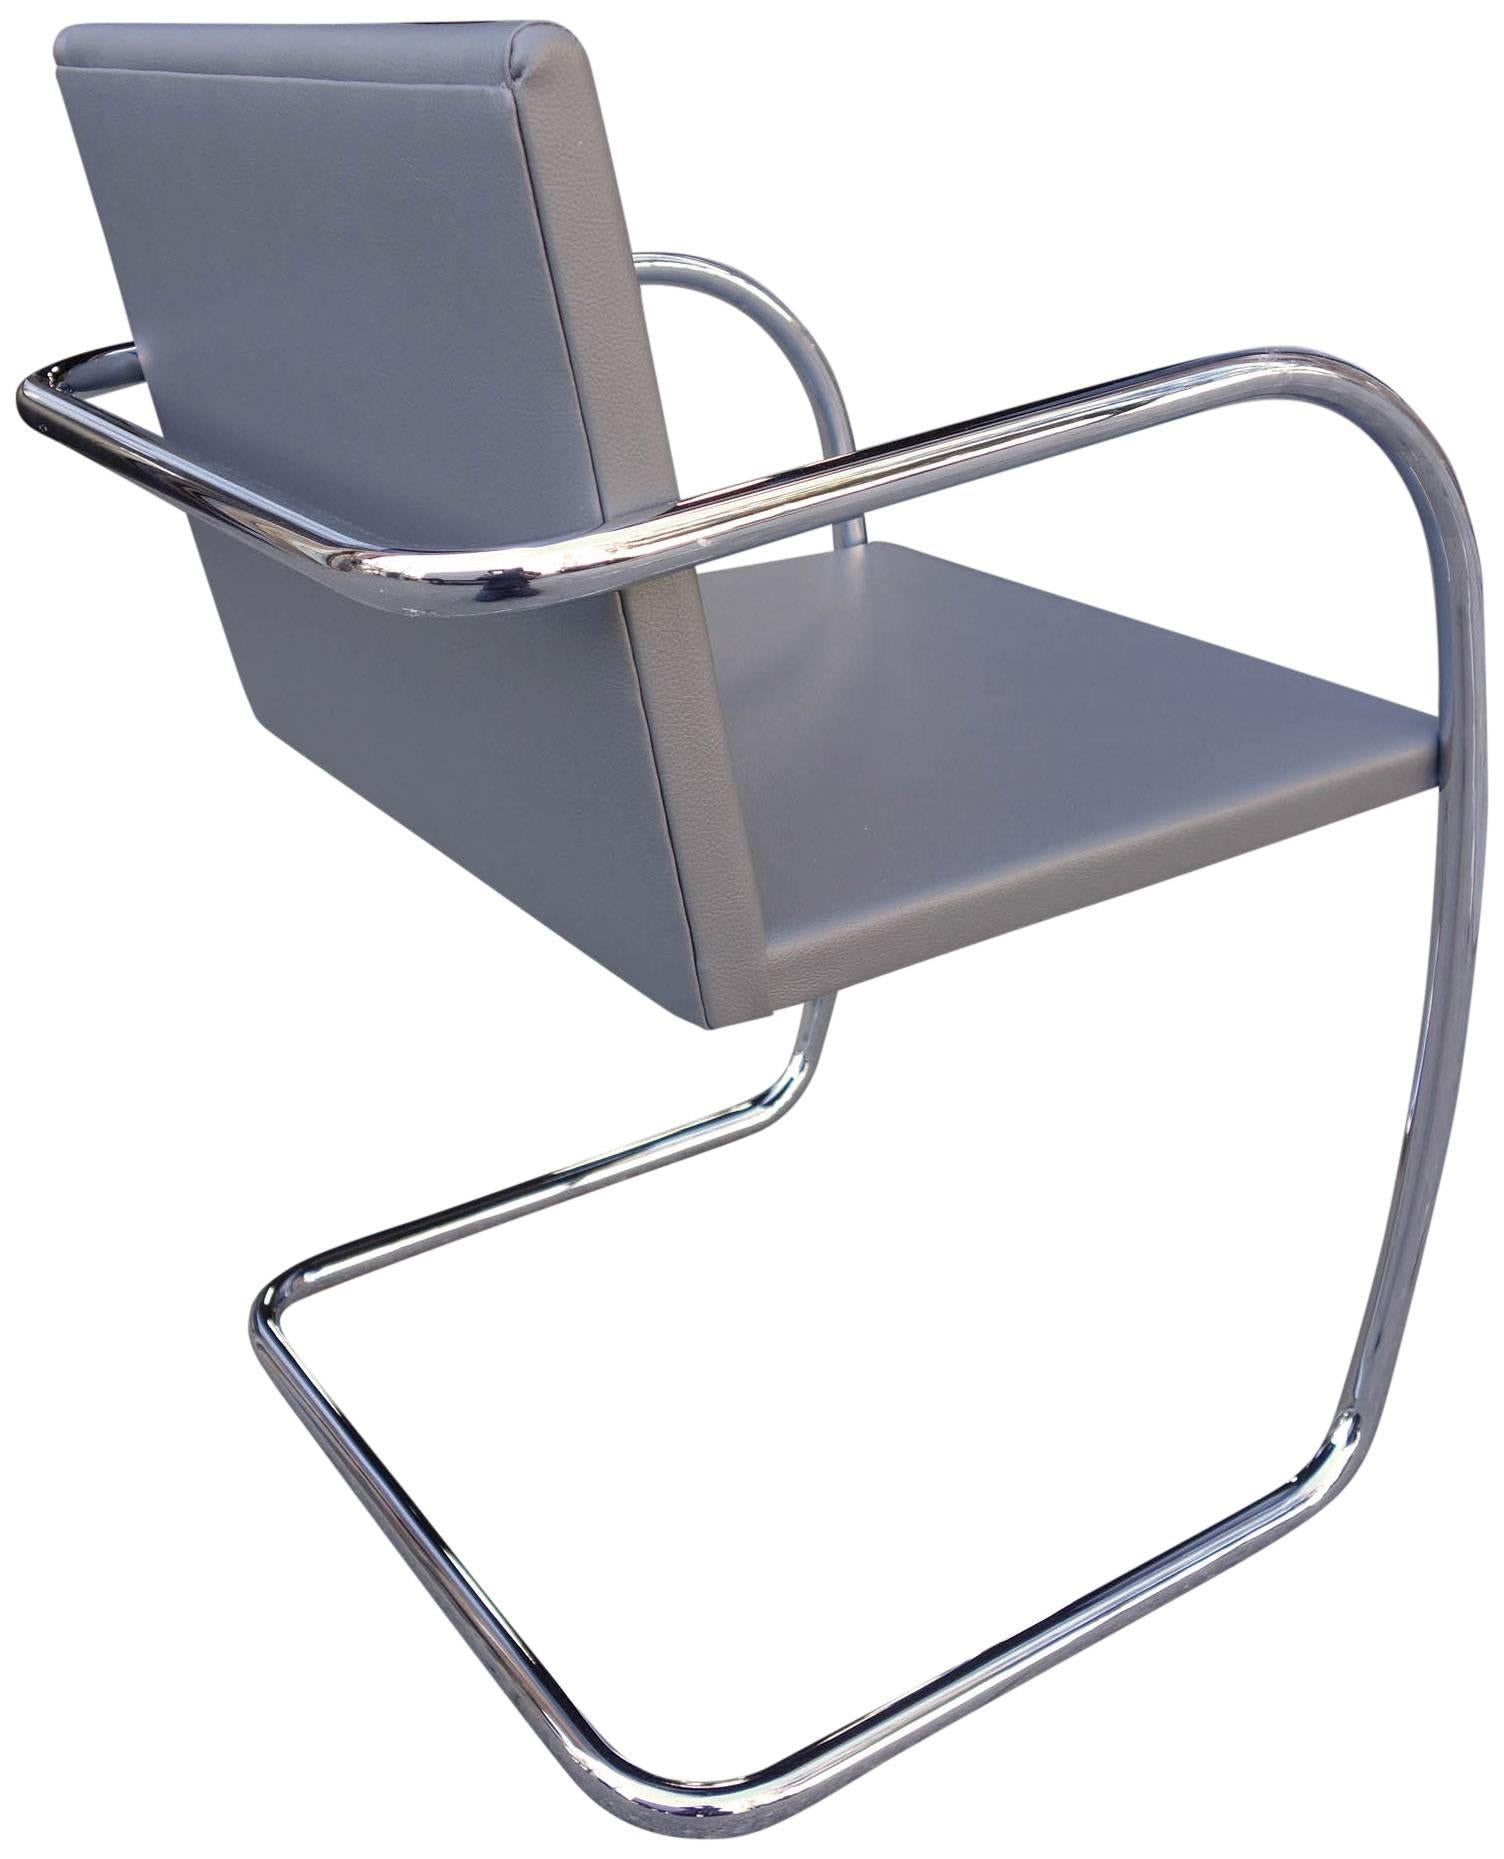 Mid-Century Modern Midcentury Mint Brno Chair in Leather by Mies van der Rohe for Knoll For Sale